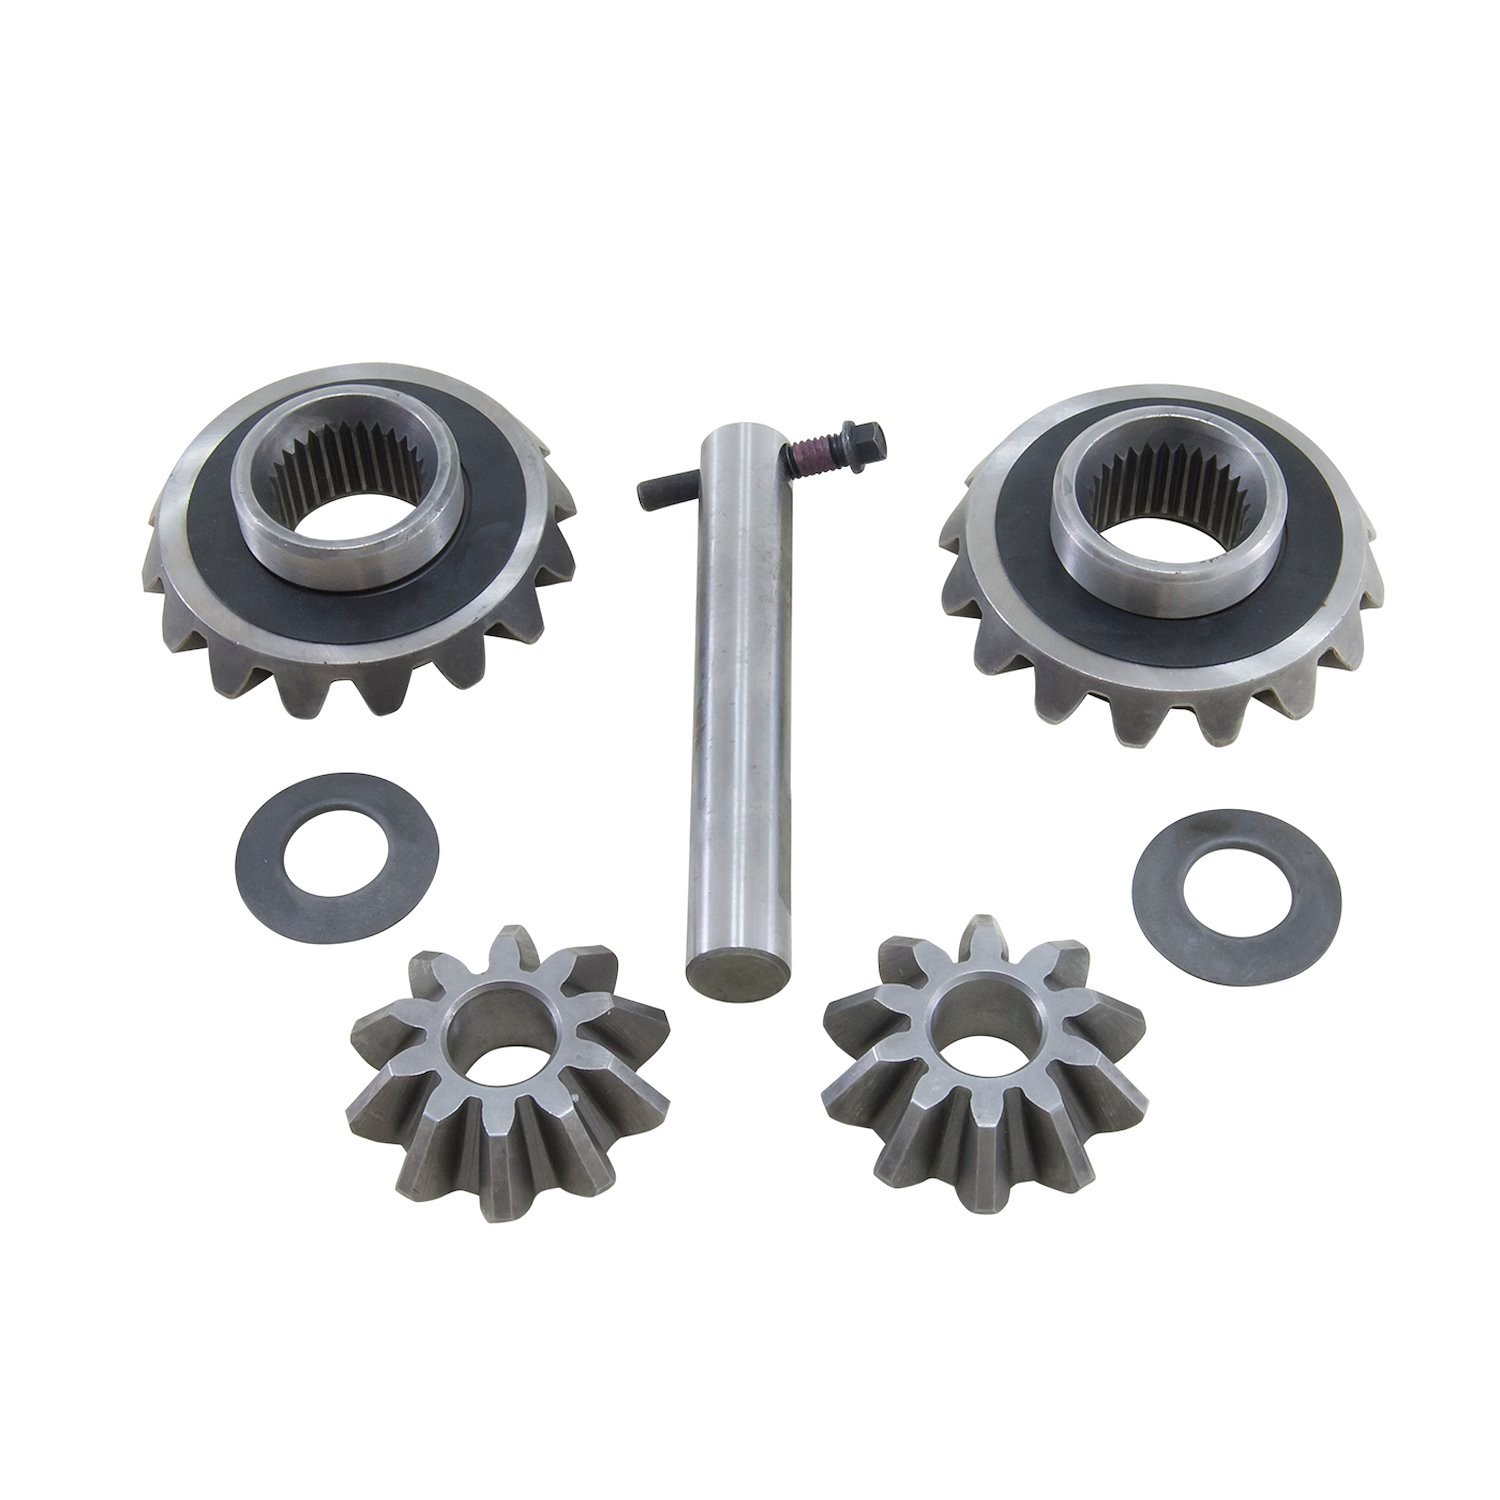 Standard Open Spider Gear Kit For 8.8 in. Ford Irs With 28 Spline Axles